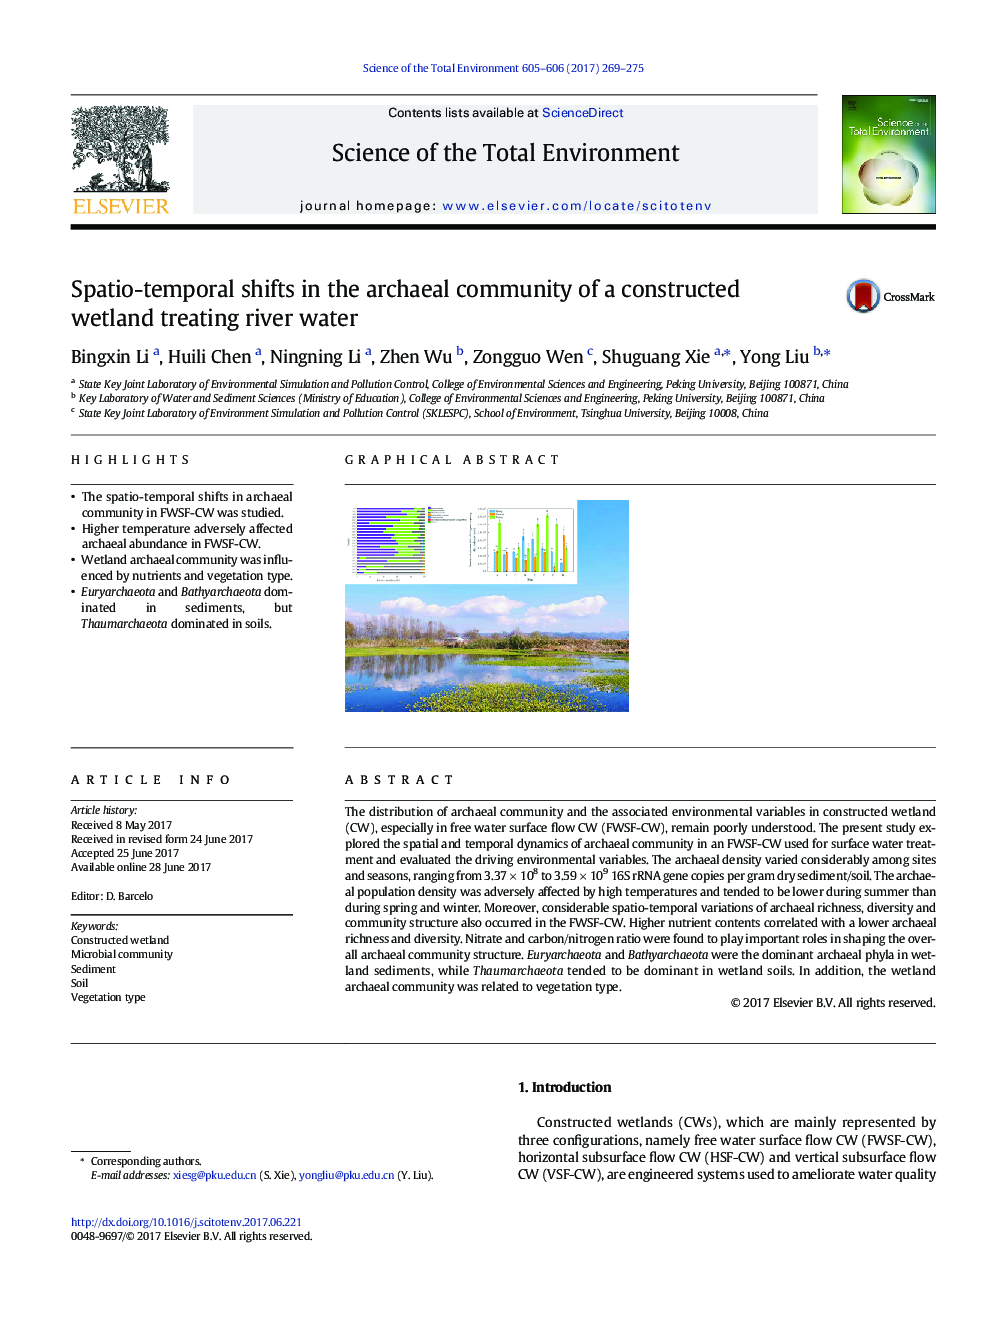 Spatio-temporal shifts in the archaeal community of a constructed wetland treating river water